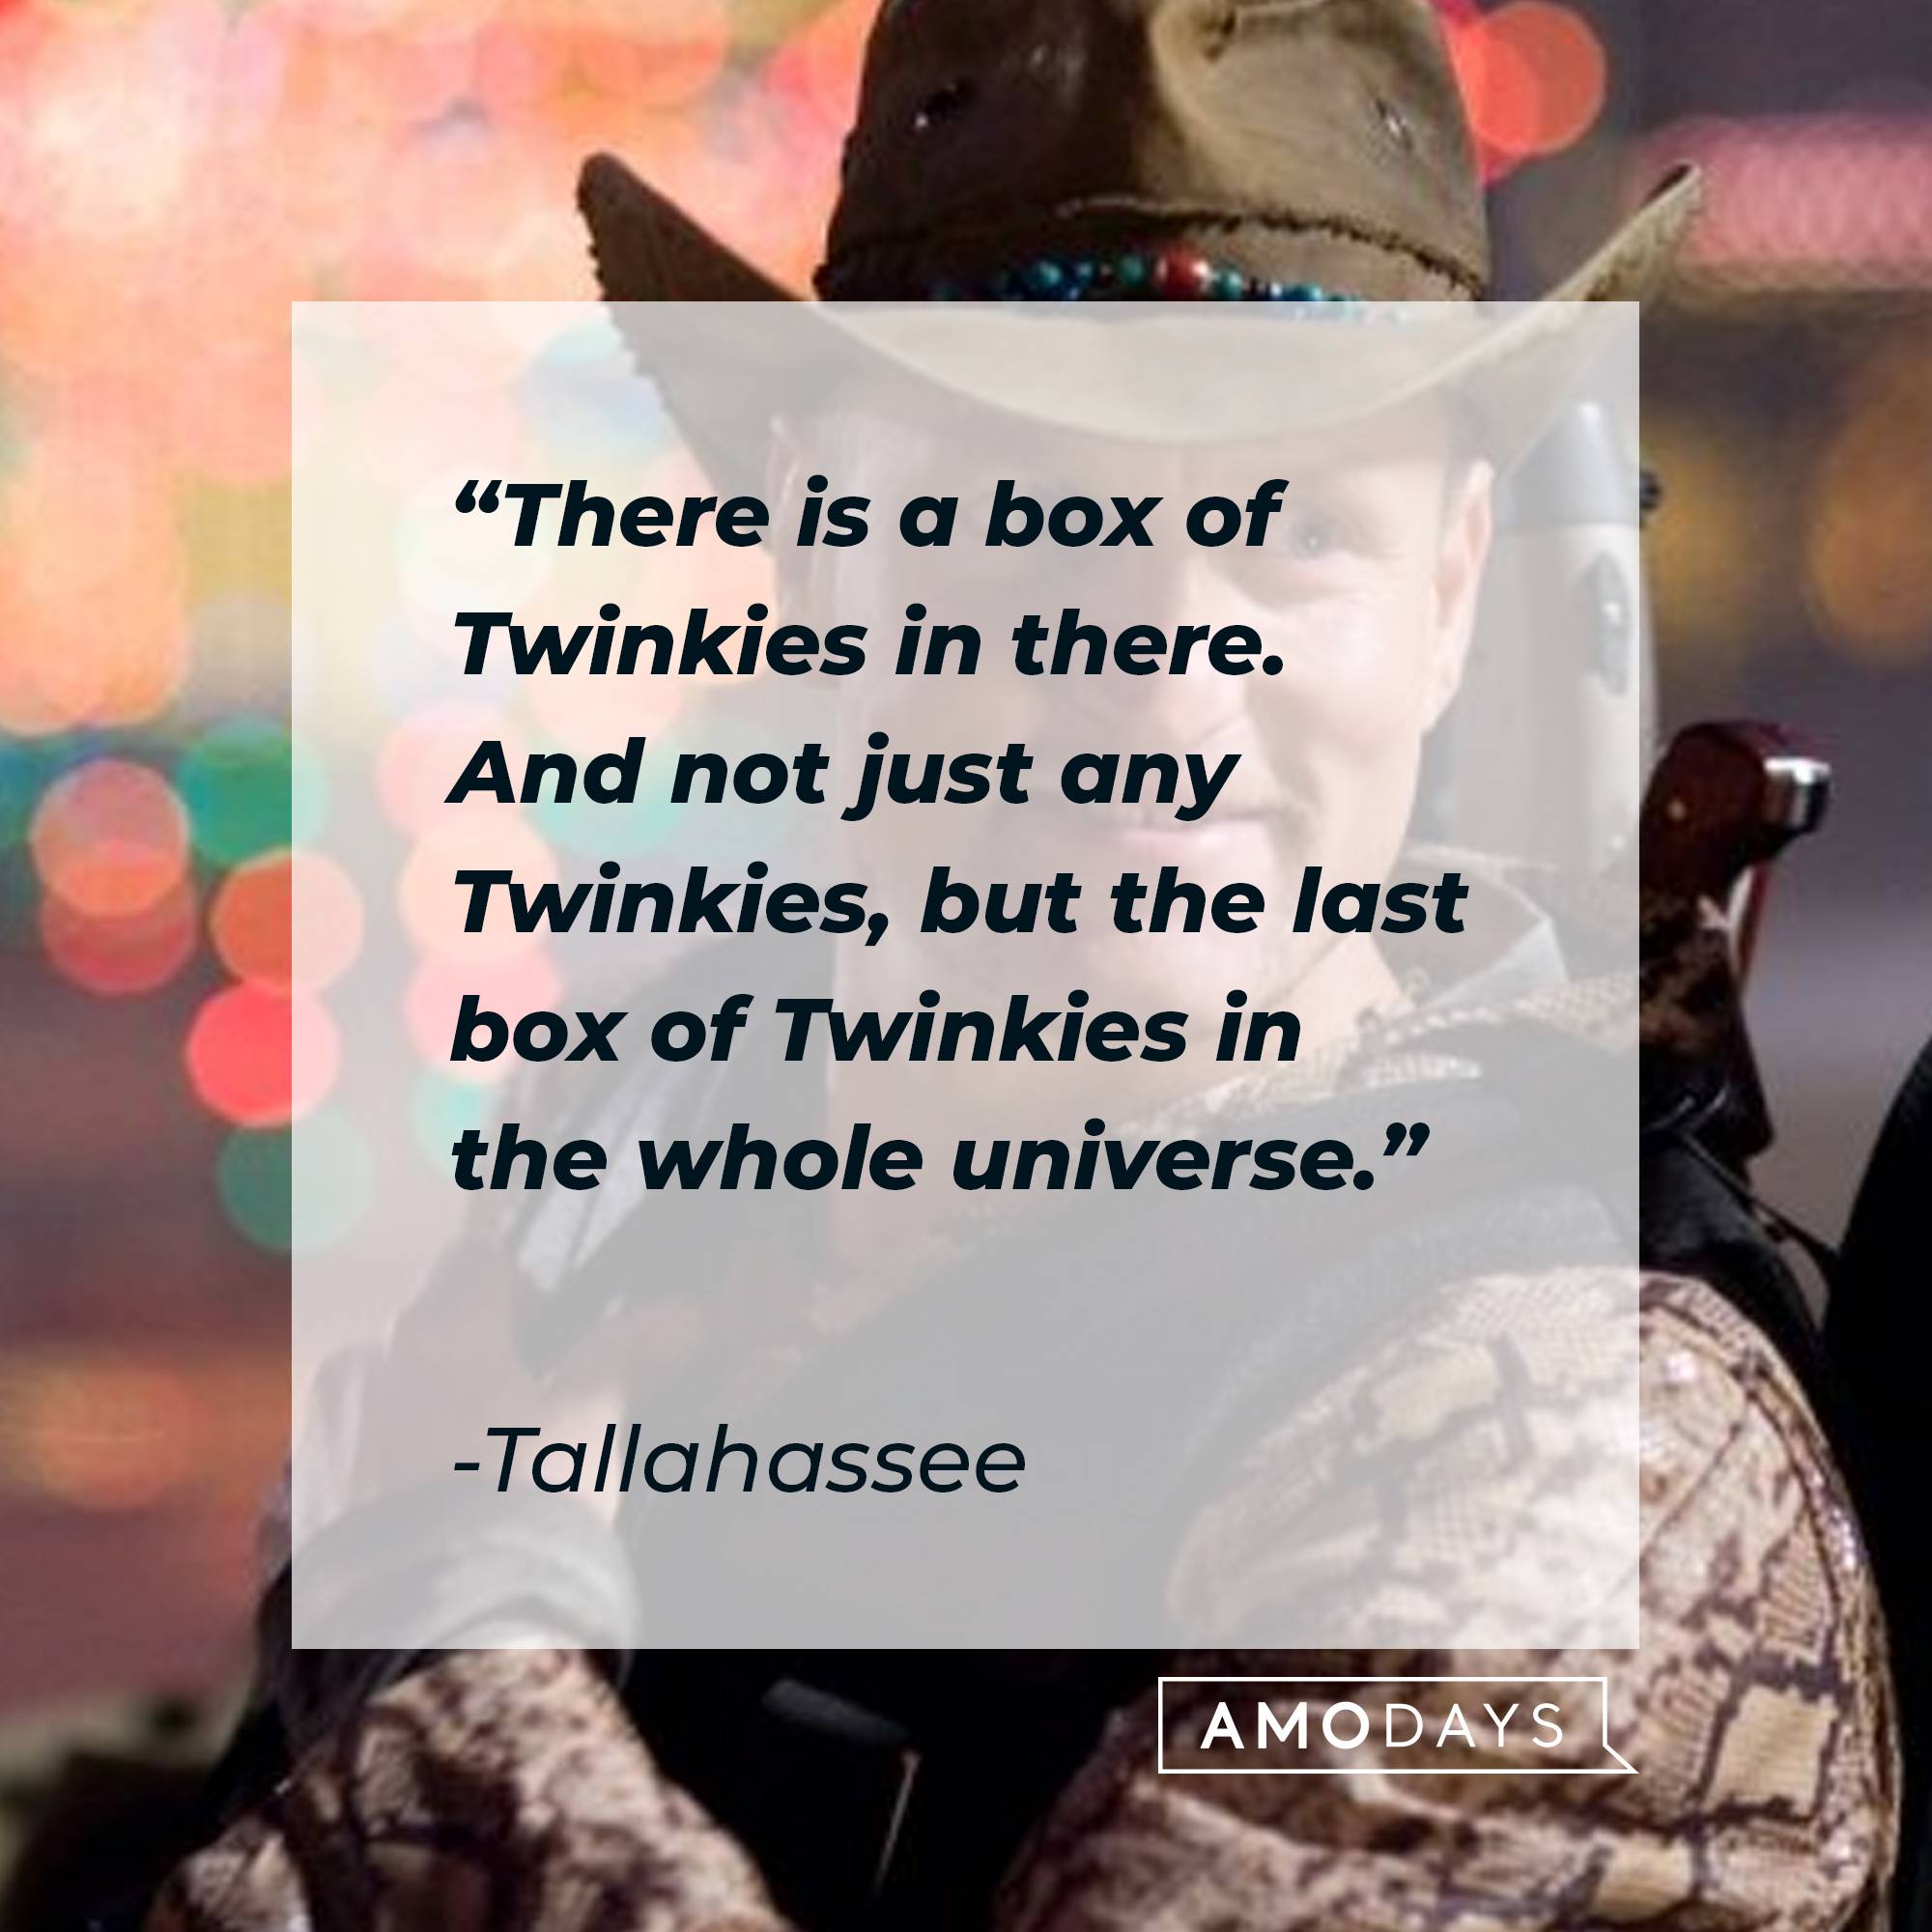 Tallahassee's quote: "There is a box of Twinkies in there. And not just any Twinkies, but the last box of Twinkies in the whole universe." | Source: Facebook.com/Zombieland